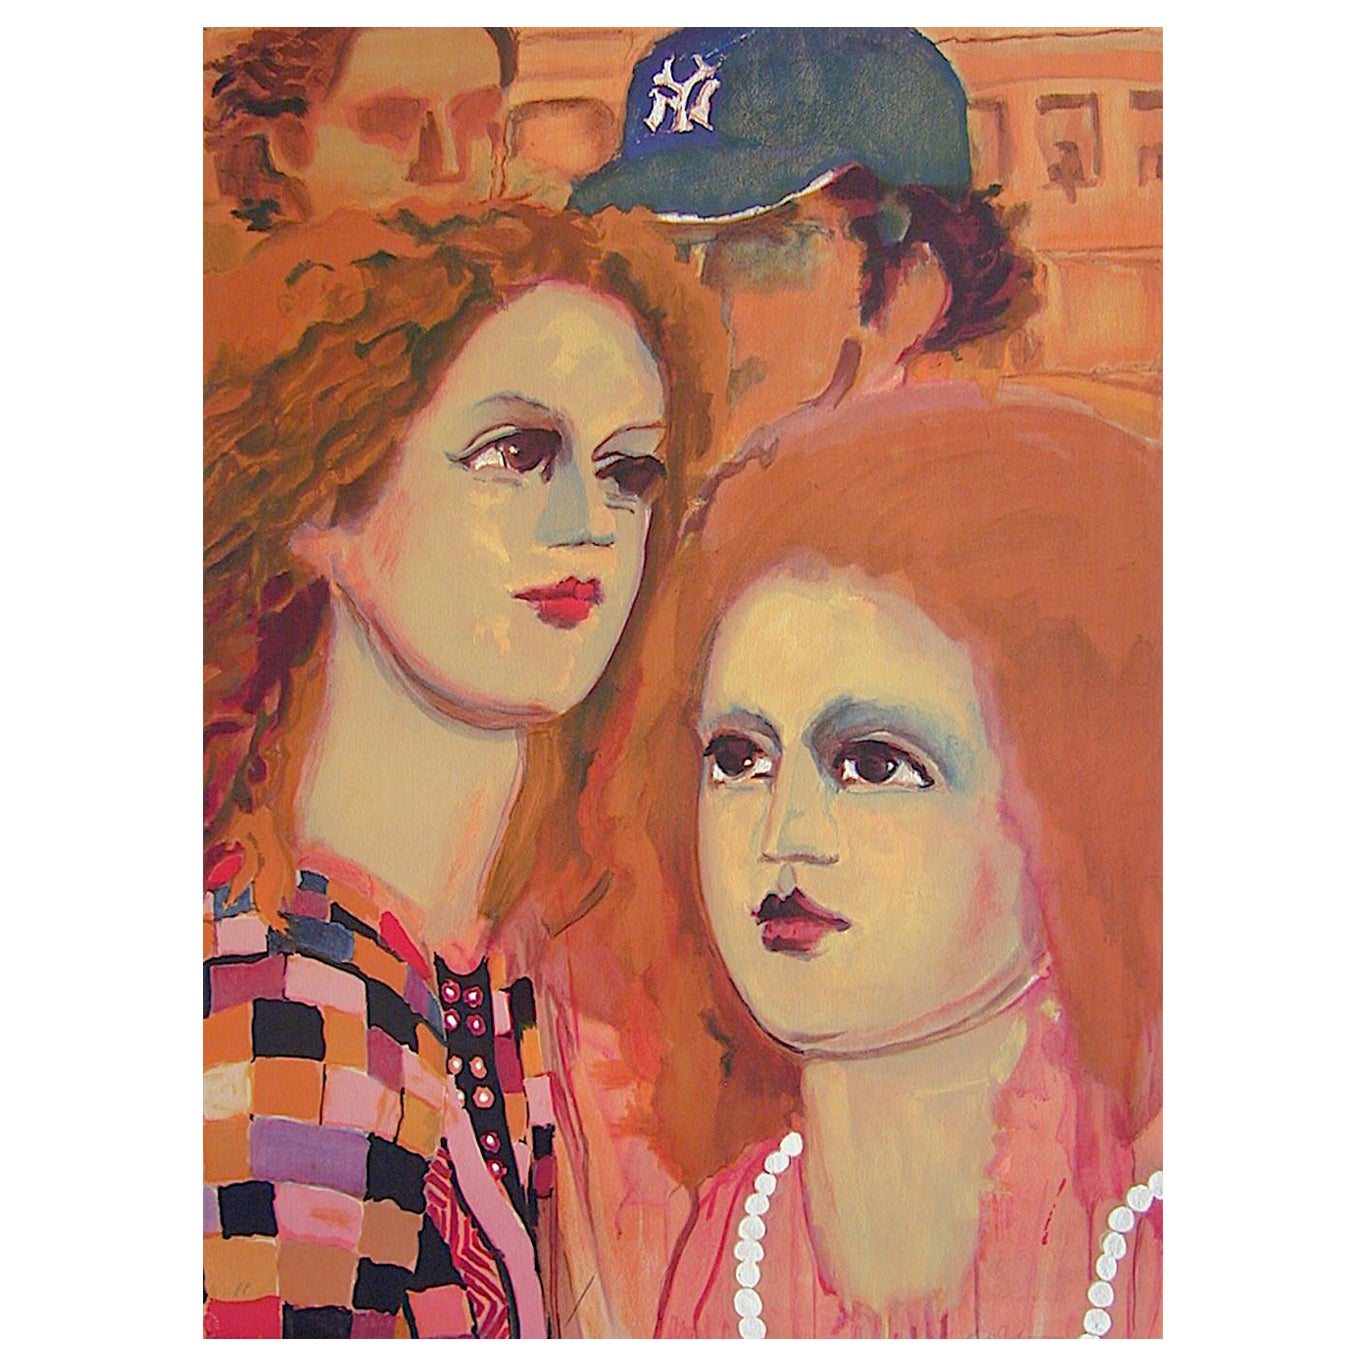 NY SCENE: FACES Signed Lithograph, Portrait Women Red Hair, Man Blue Yankee Cap